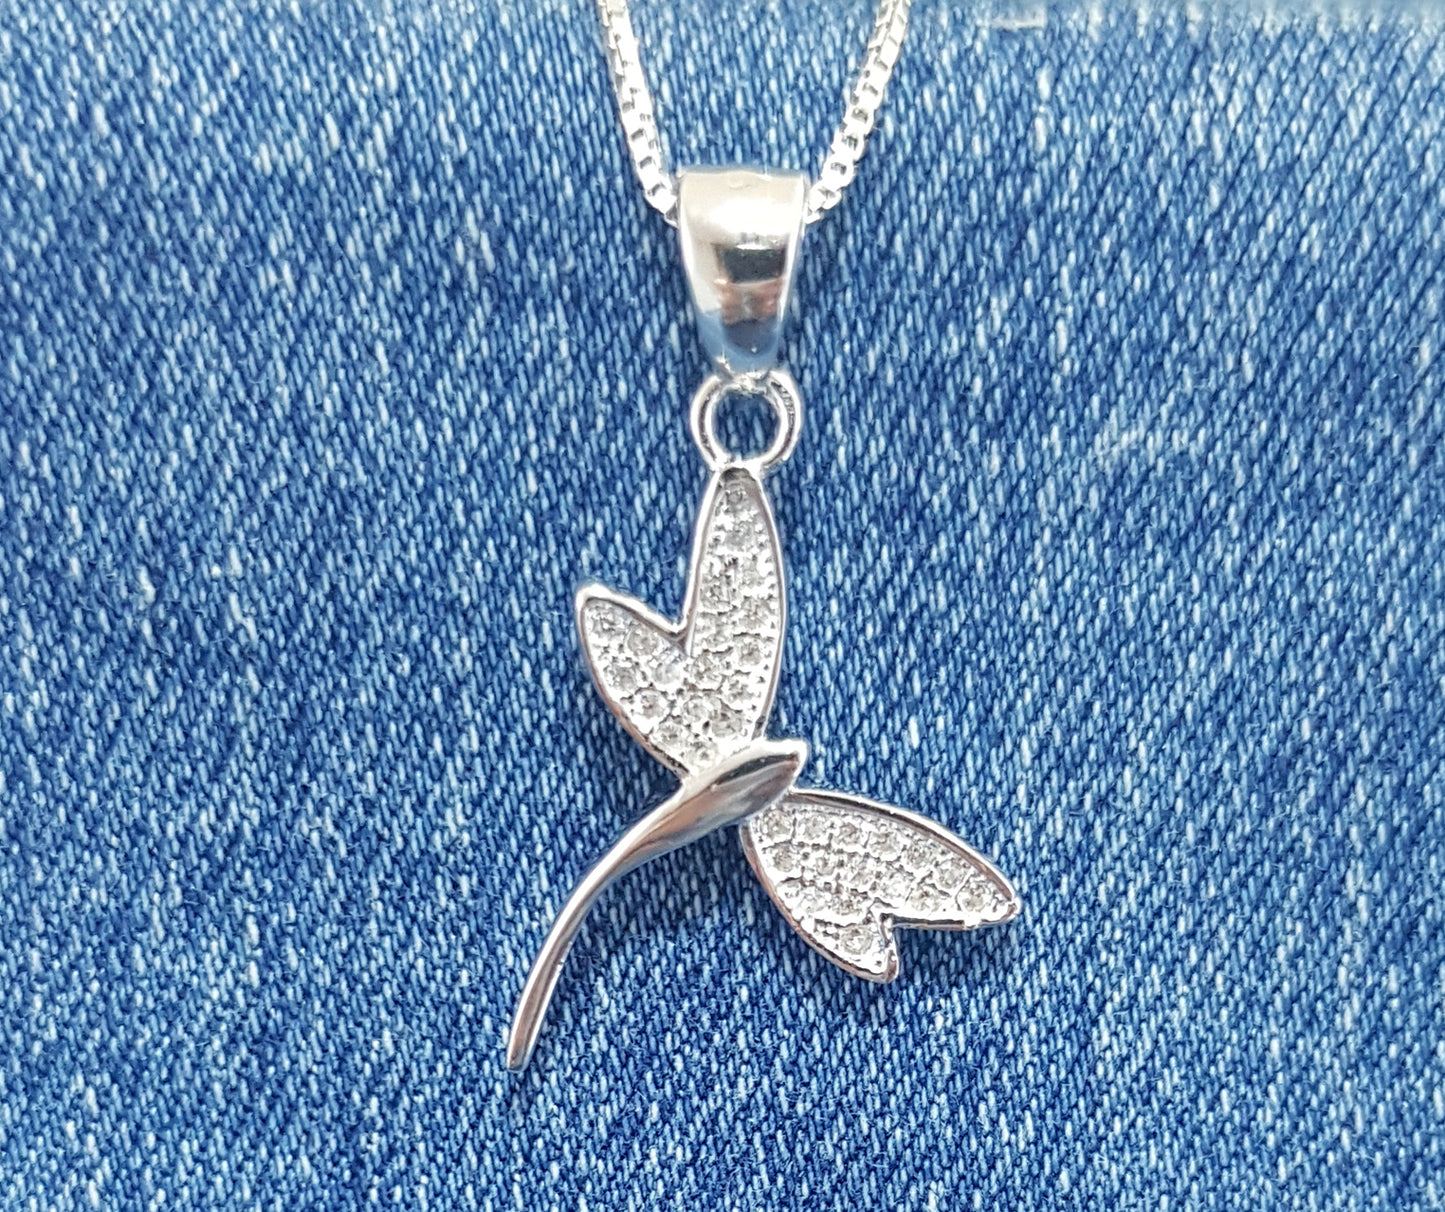 Sterling Silver Dragonfly Pendant with Cubic Zirconia Stones